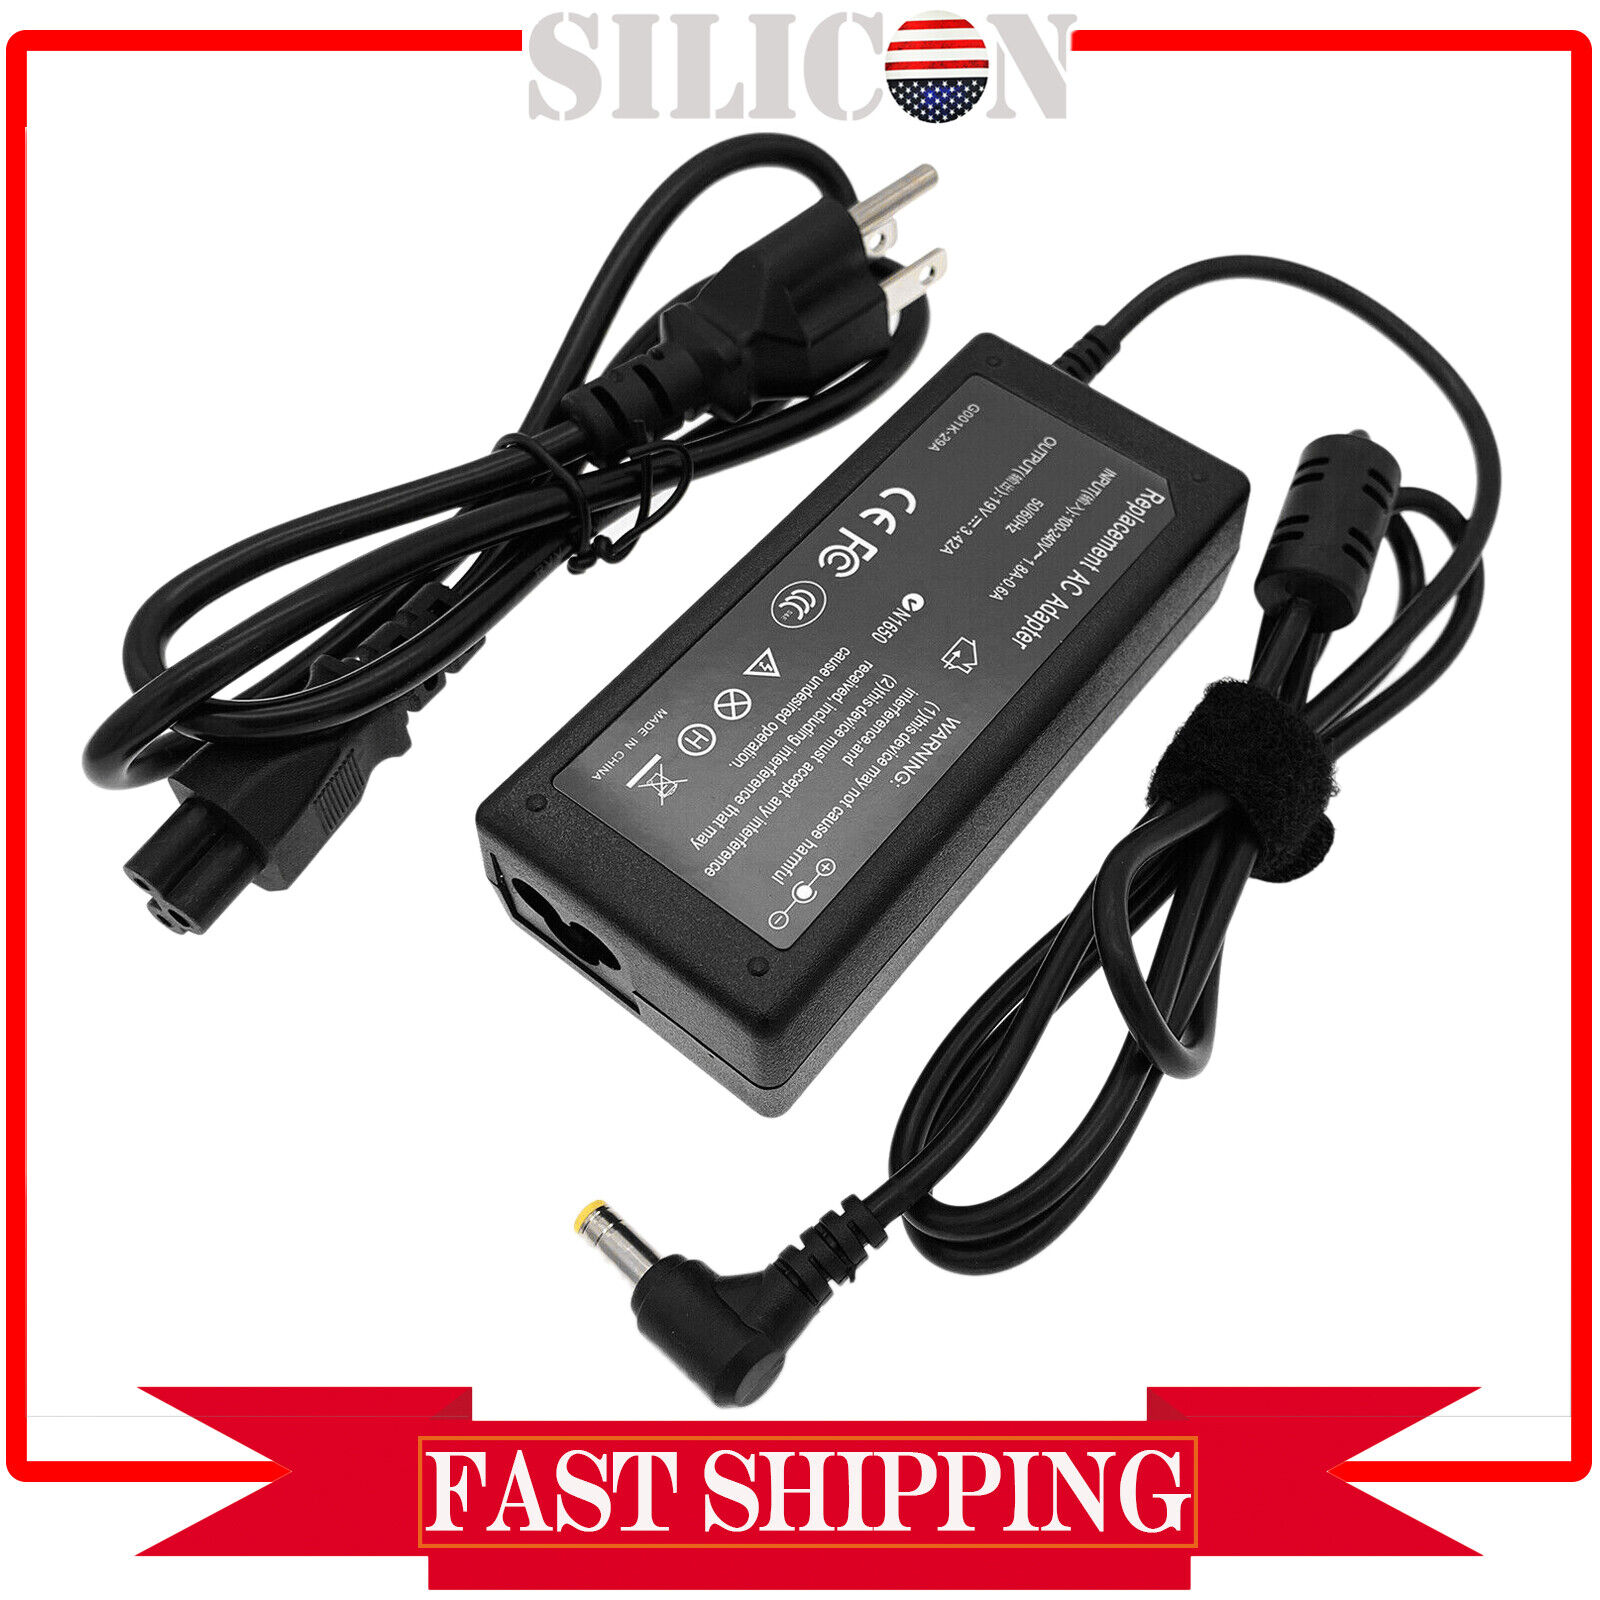 New AC Adapter Cord Charger For Toshiba Satellite C55-A5249 C55-A5300 L45t-A4230